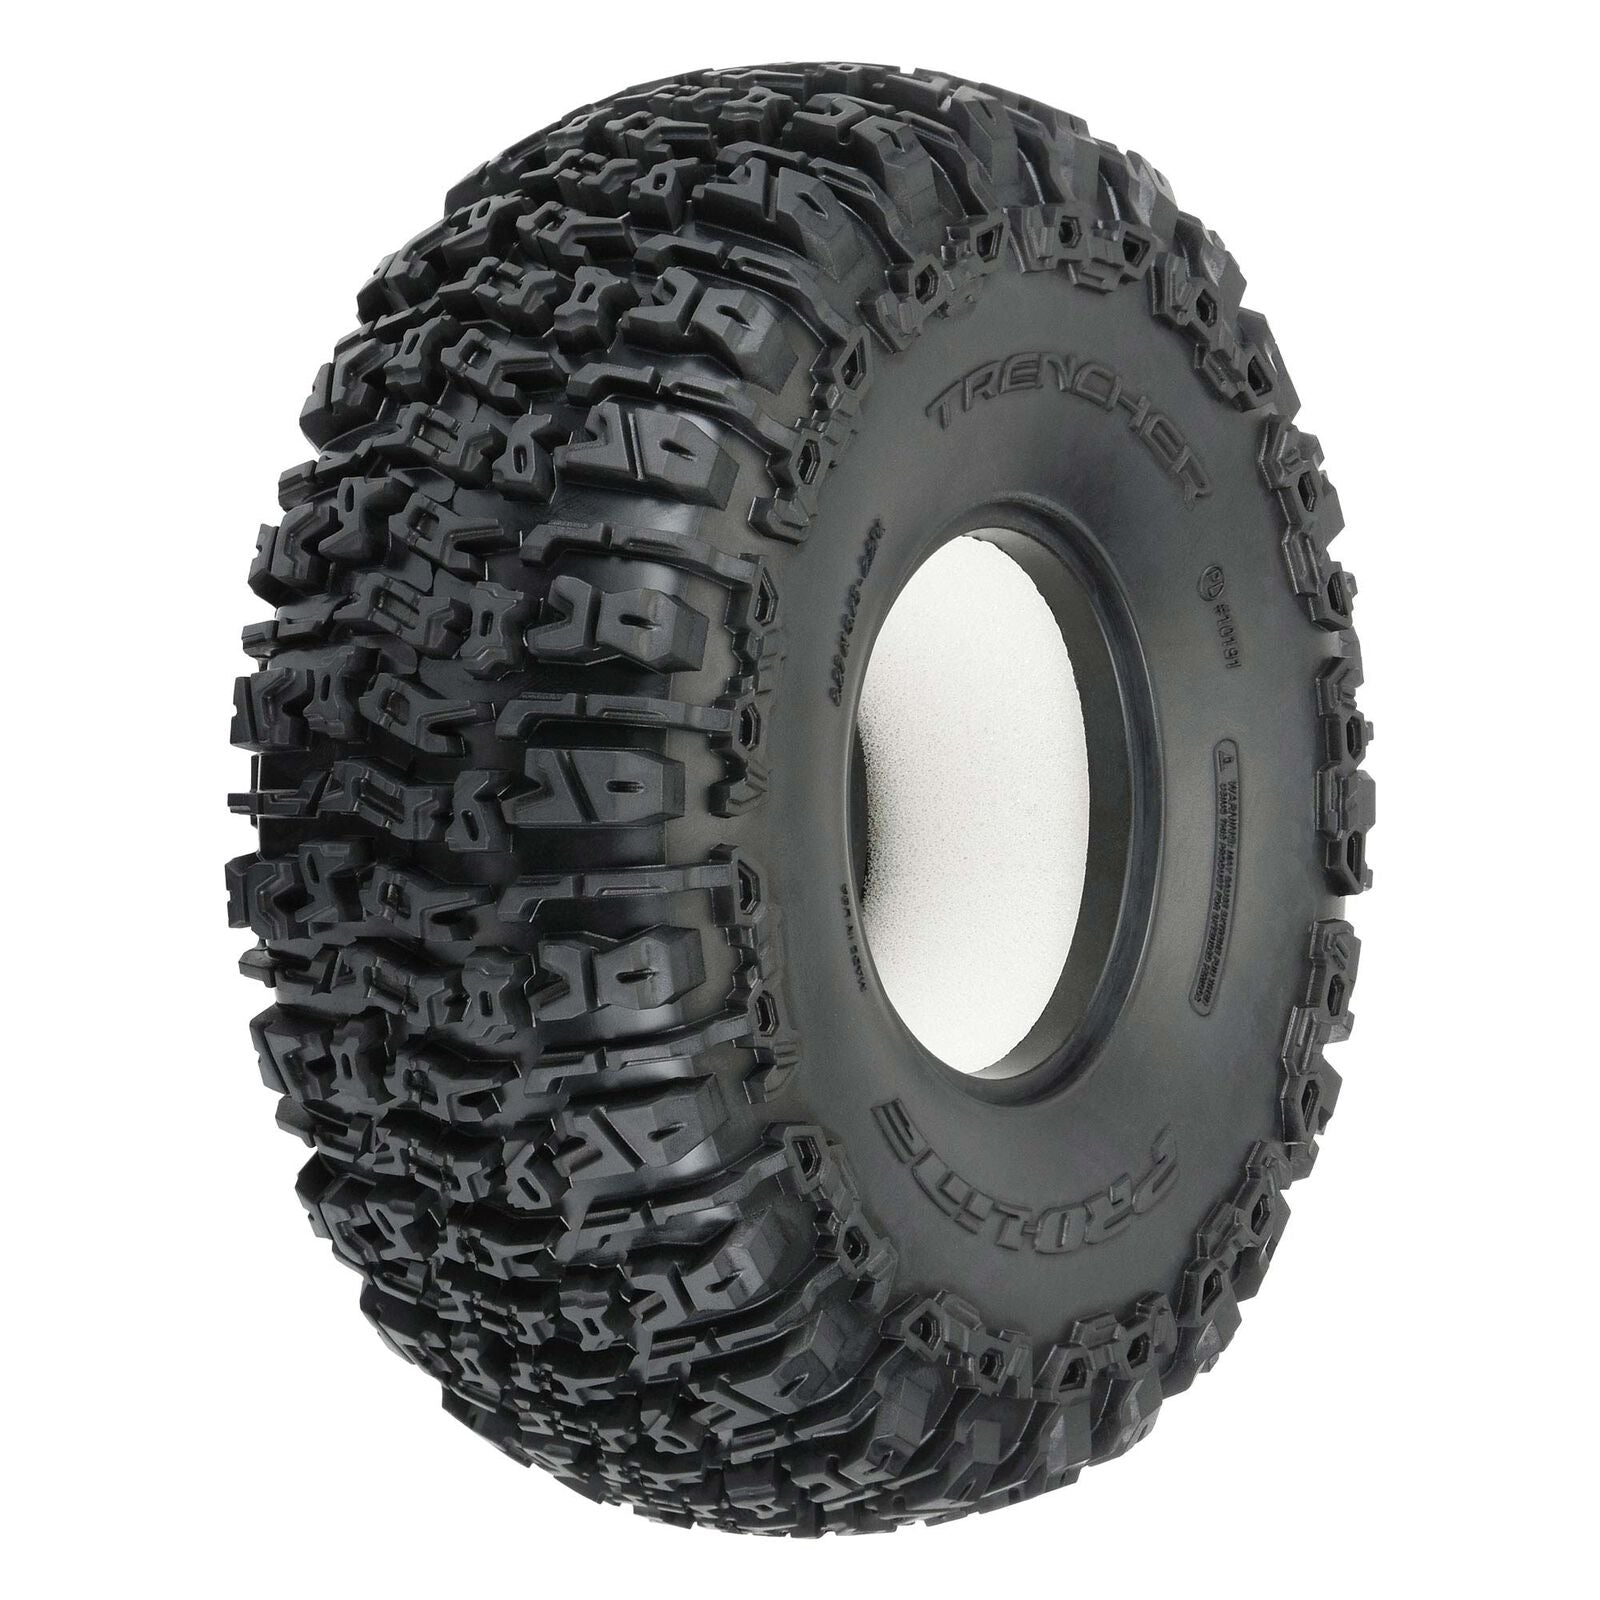 PROLINE 10191-14 1/10 Trencher G8 Front/Rear 2.2" Rock Crawling Tires (2)